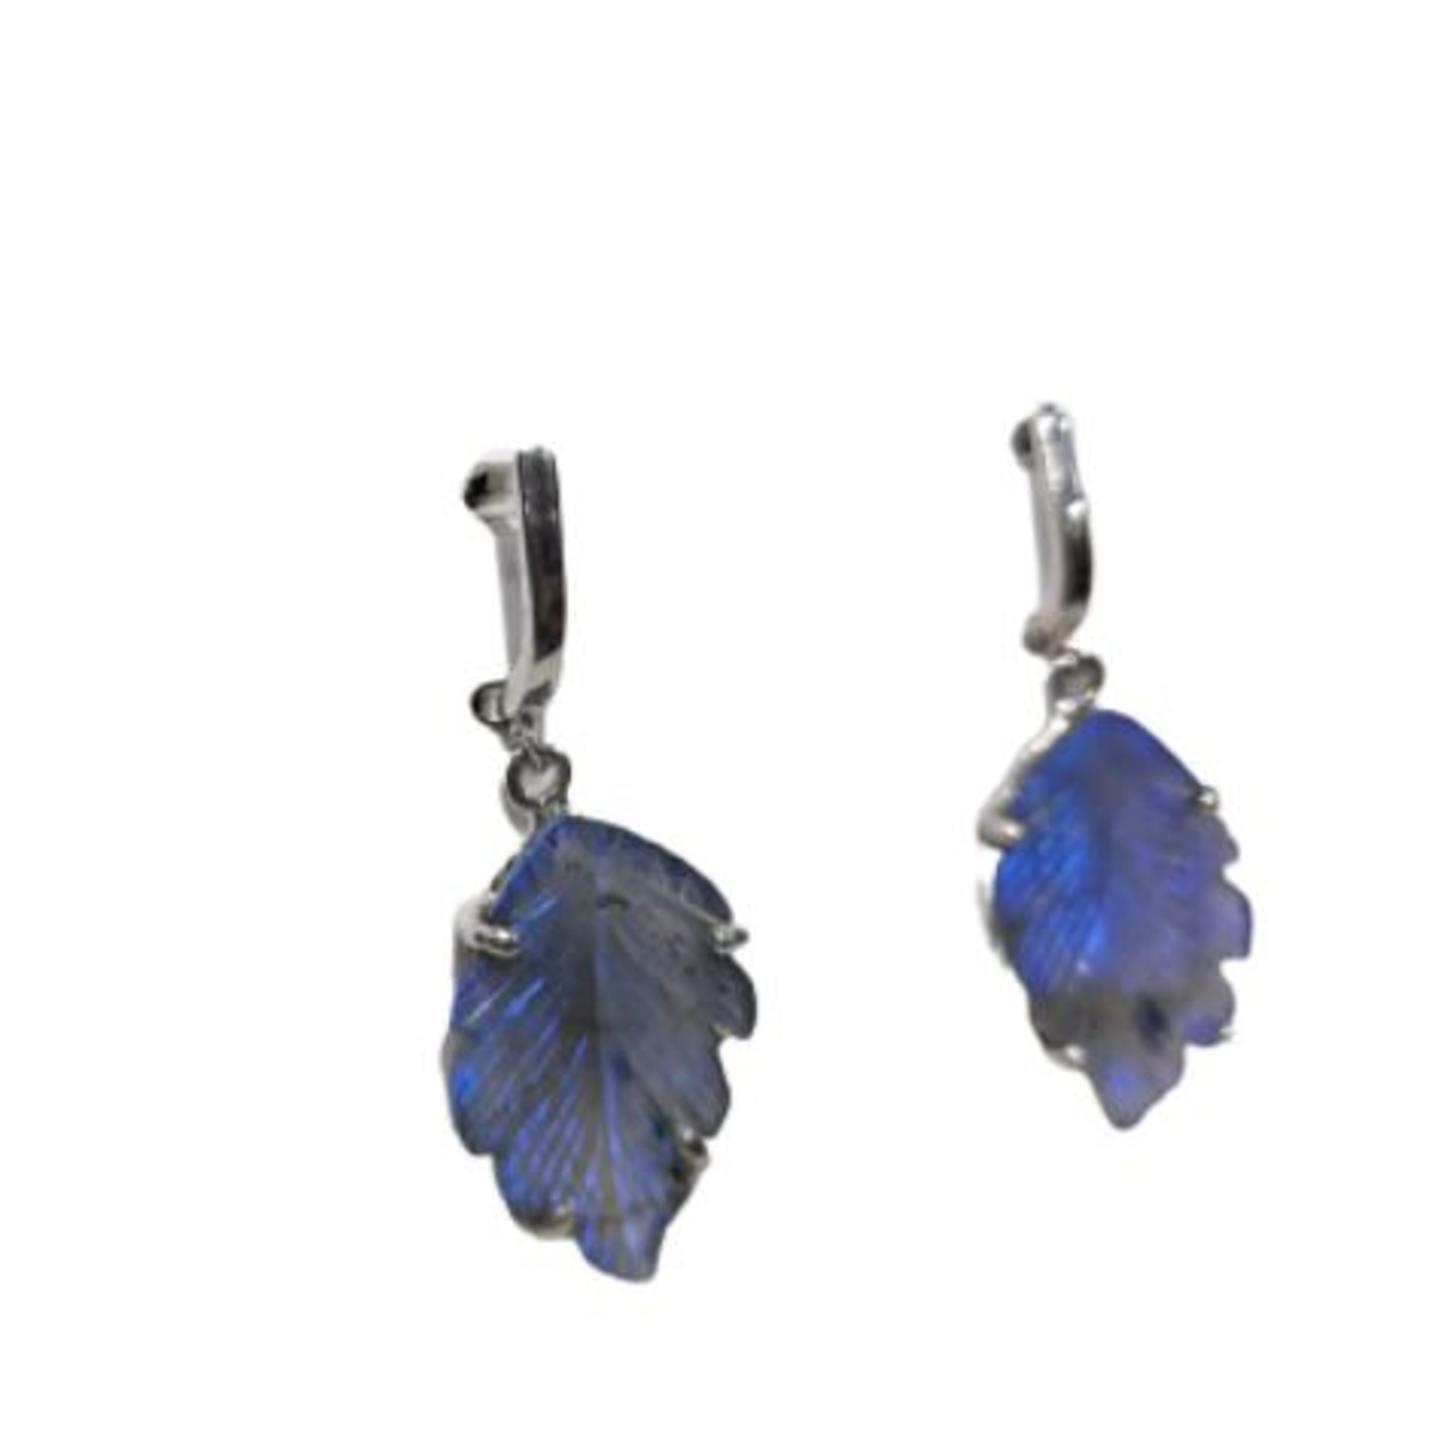 Jewel Art N Craft LEAF CUT NATURAL STONE EARRINGS IN 92.5 STERLING SILVER WITH RHODIUM PLATINGavailable with tiger eye, Lapis lazuli, Rose quartz, Smokey topaz, green onex, Terquoise, malakite stones